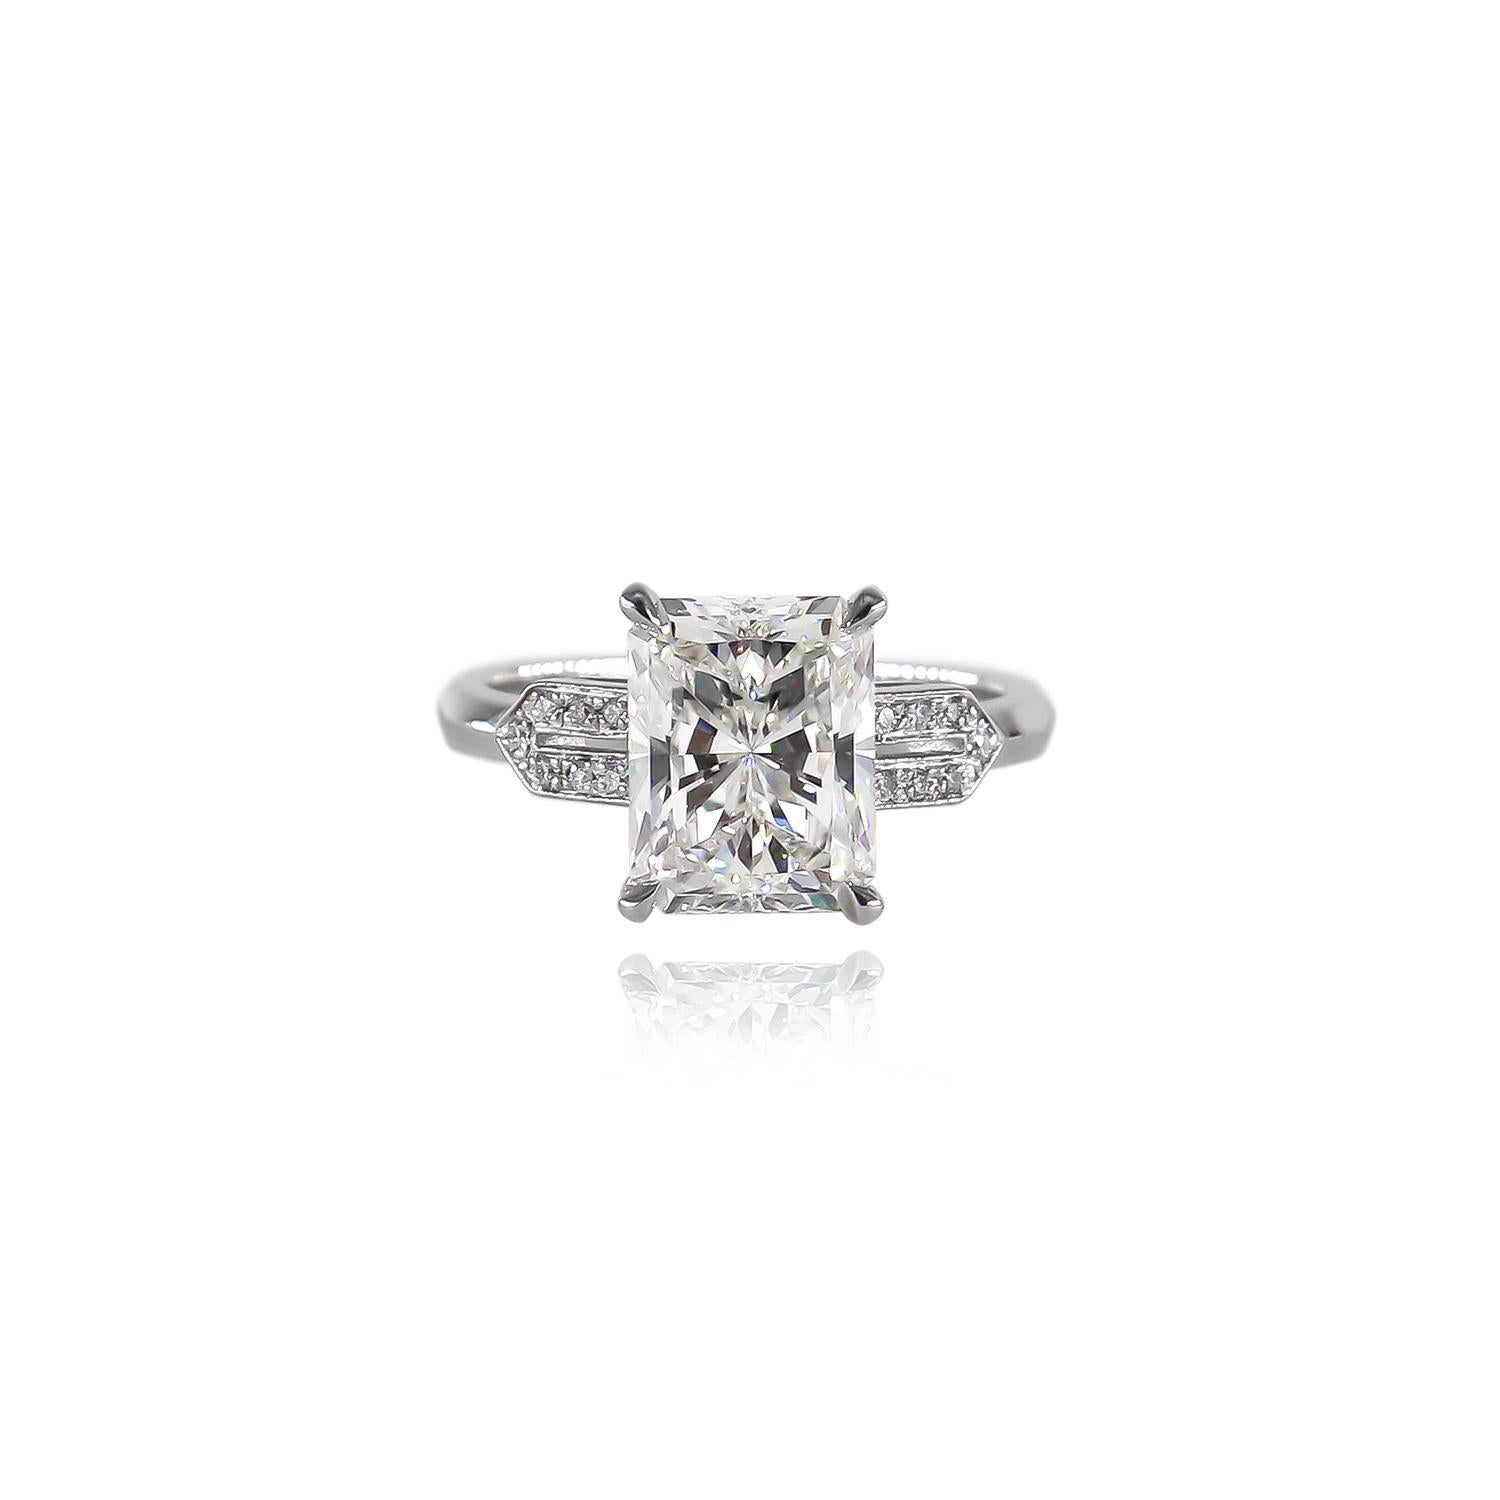 This exquisite new ring from the J. Birnbach workshop features a certified 3.01 carat radiant cut diamond of I color and VS1 clarity as described by GIA grading #2357921677. Set in a platinum ring with Art Deco inspired motifs, this geometric